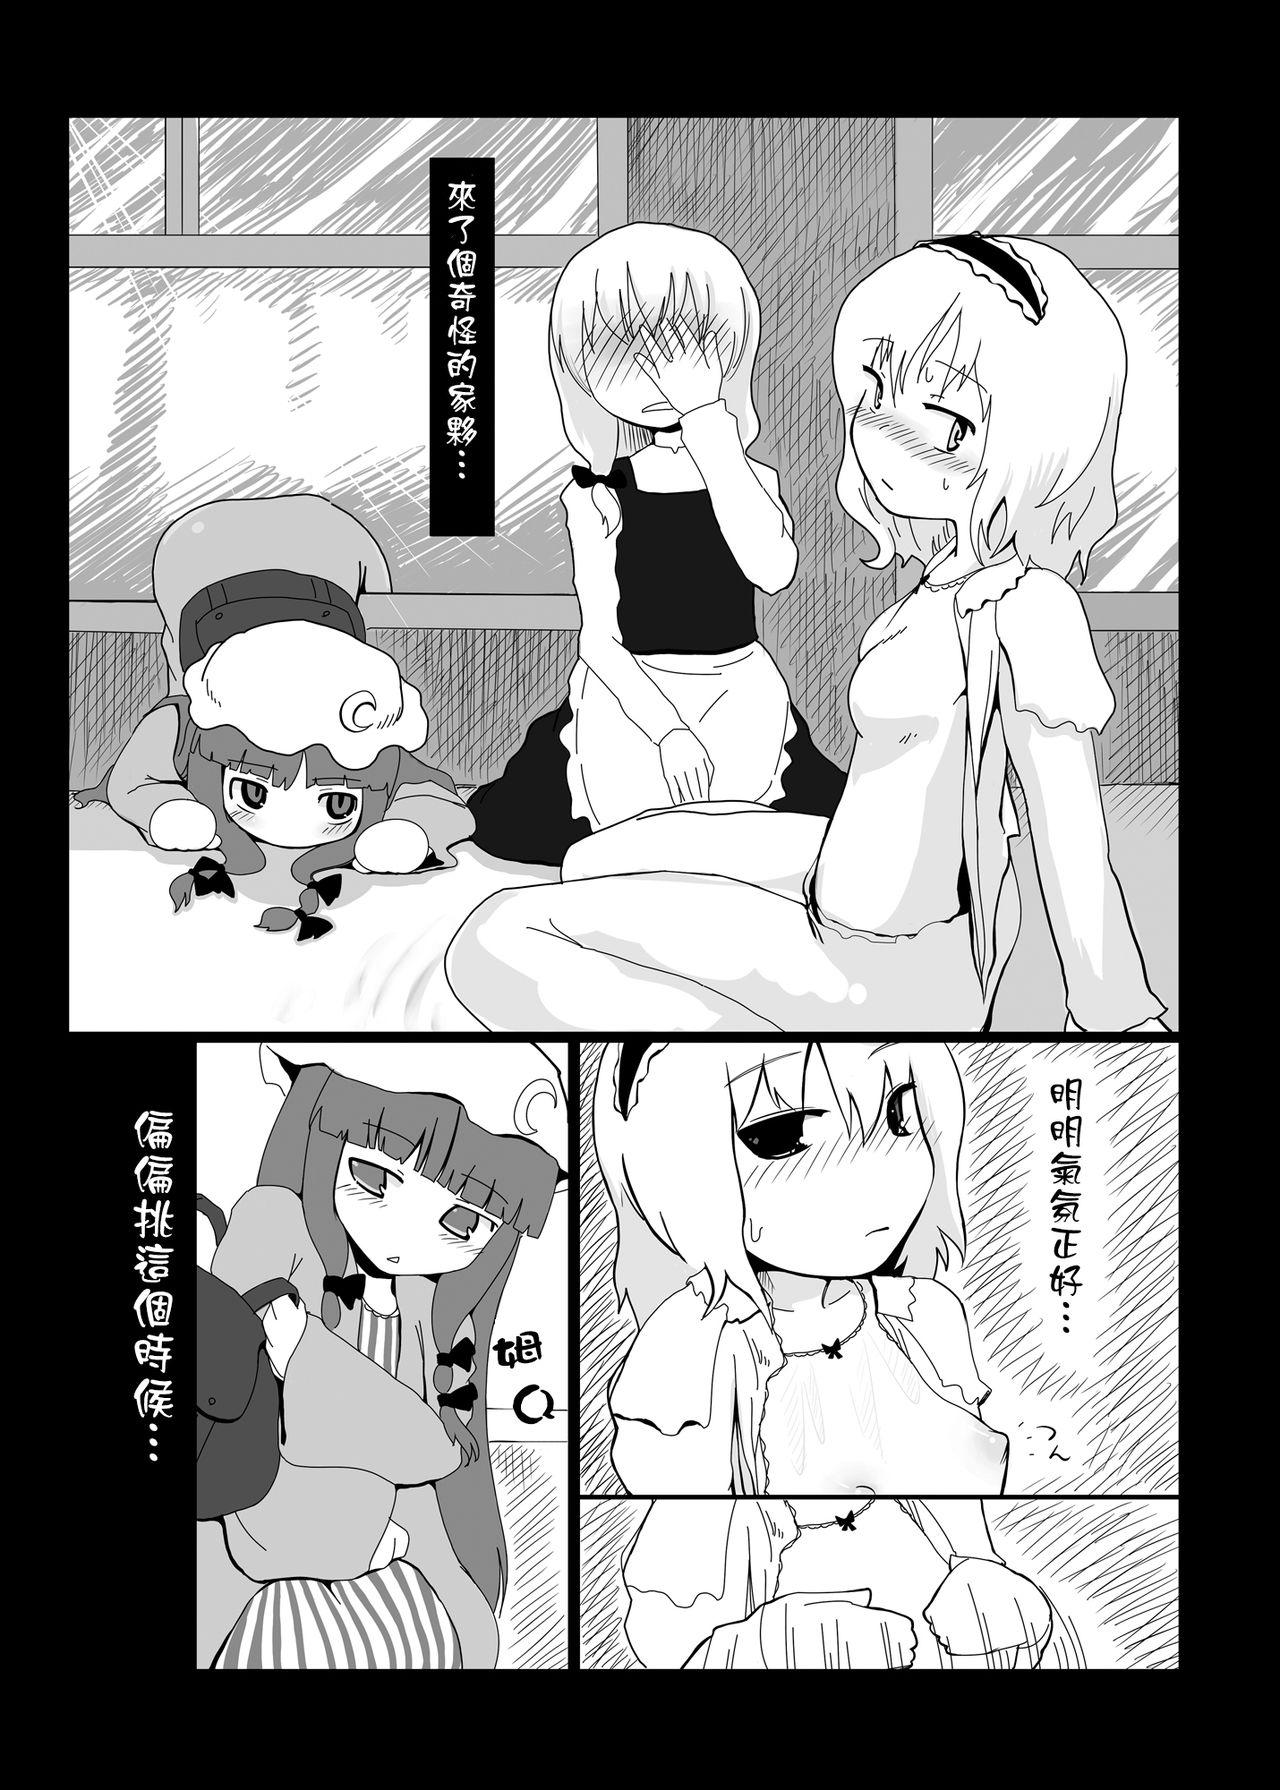 Hot Blow Jobs Touhou Ero Atsume. - Touhou project Sapphicerotica - Page 9